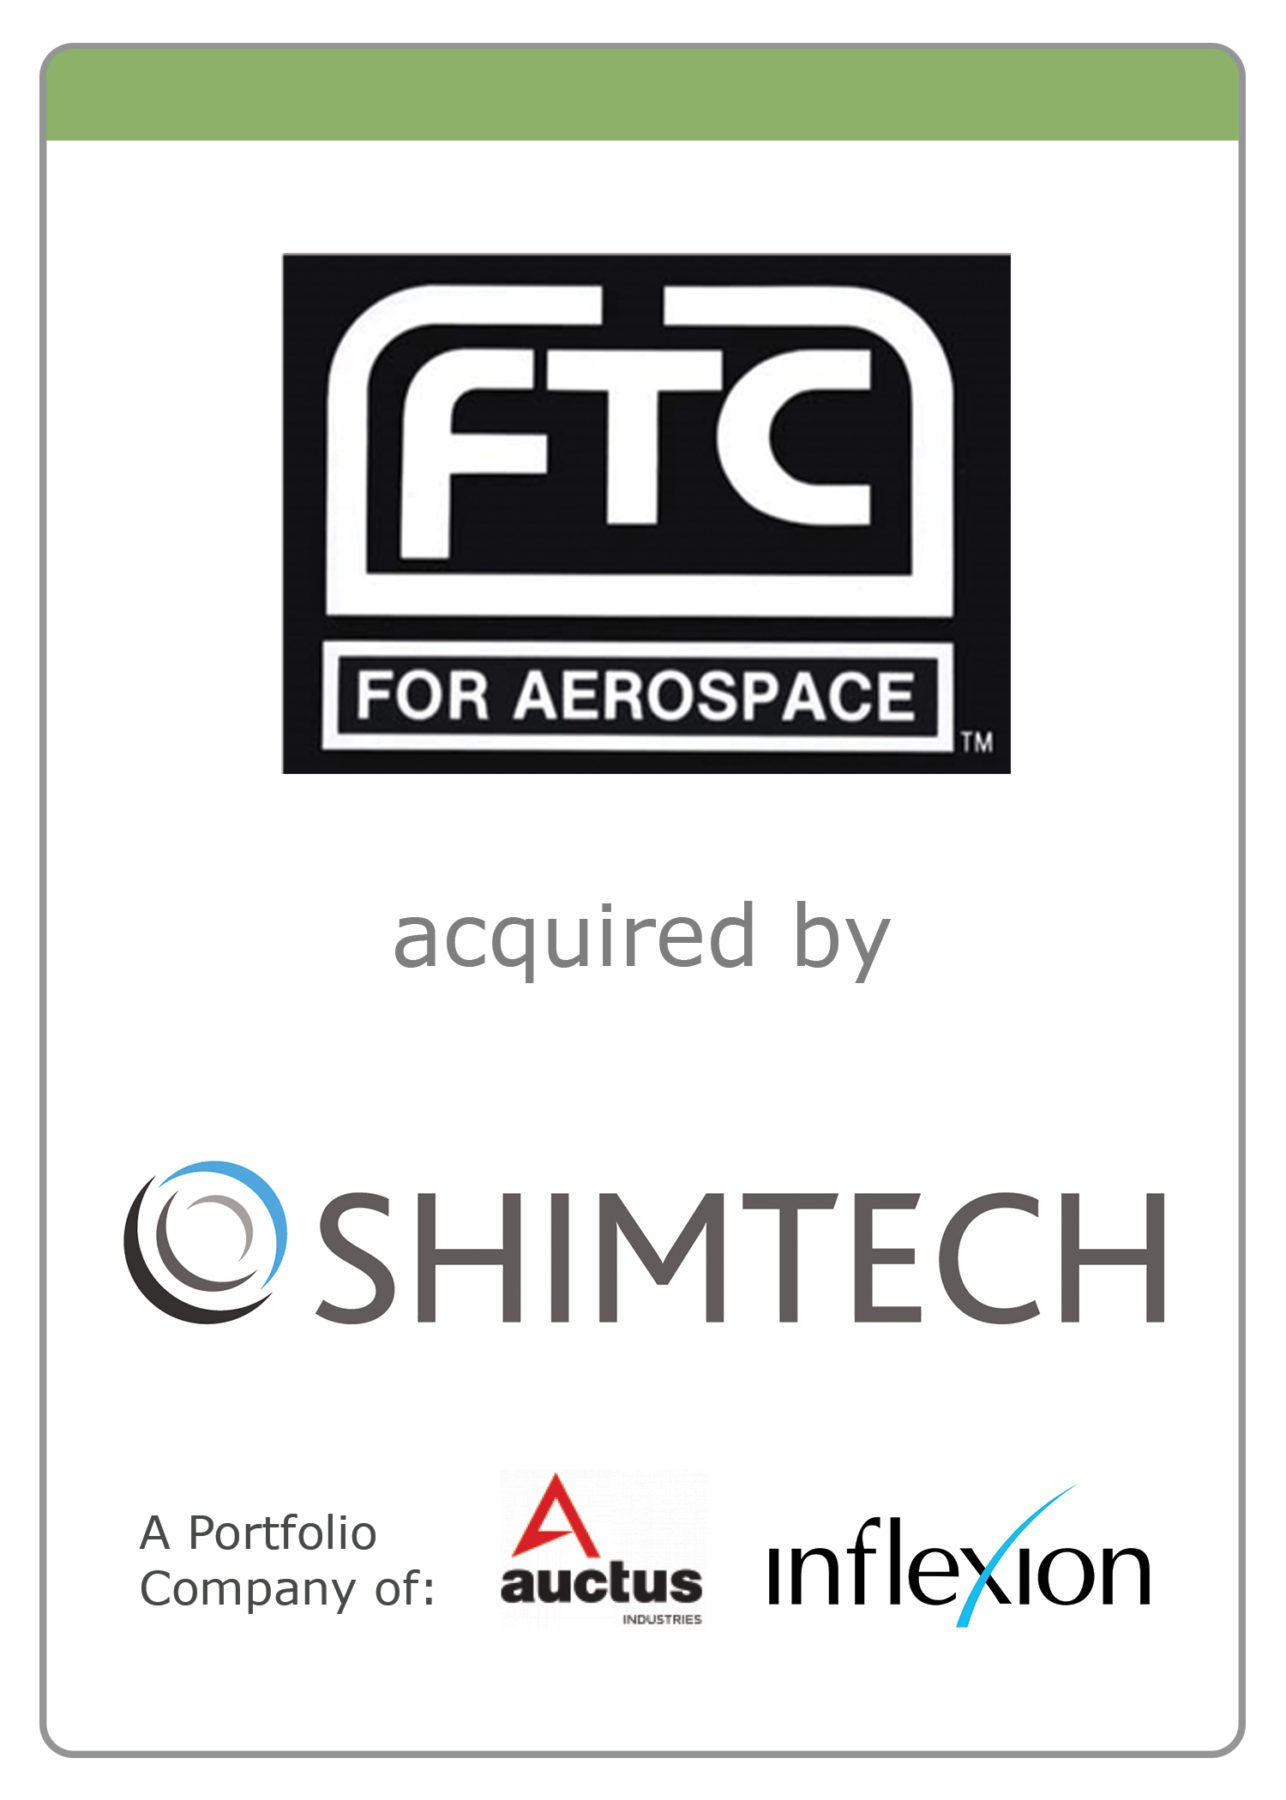 FTC acquired by Shimtech